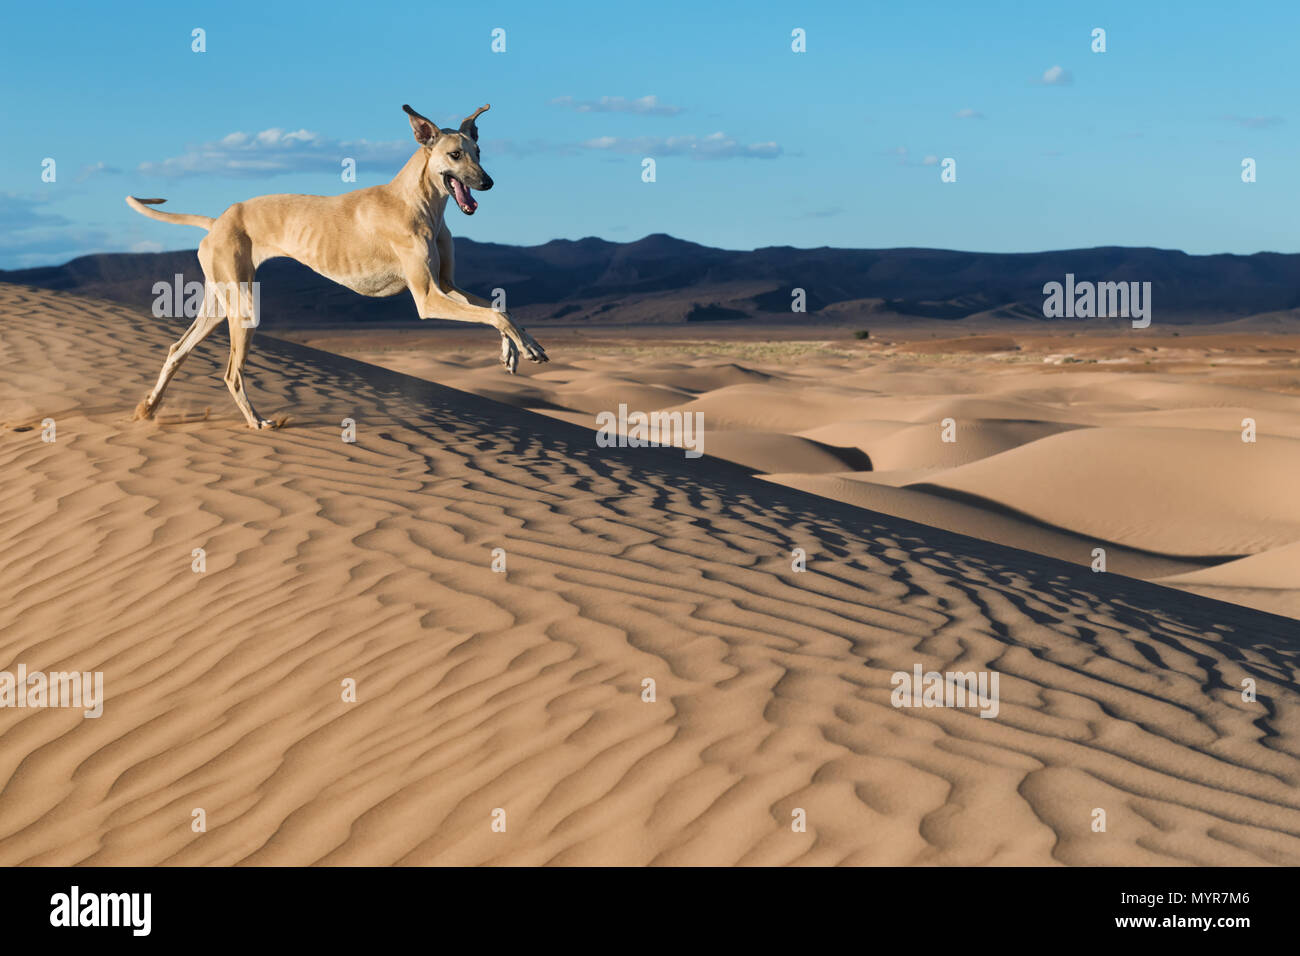 A happy, brown Sloughi dog (Arabian greyhound) runs in the sand dunes in the Sahara desert of Morocco. Stock Photo